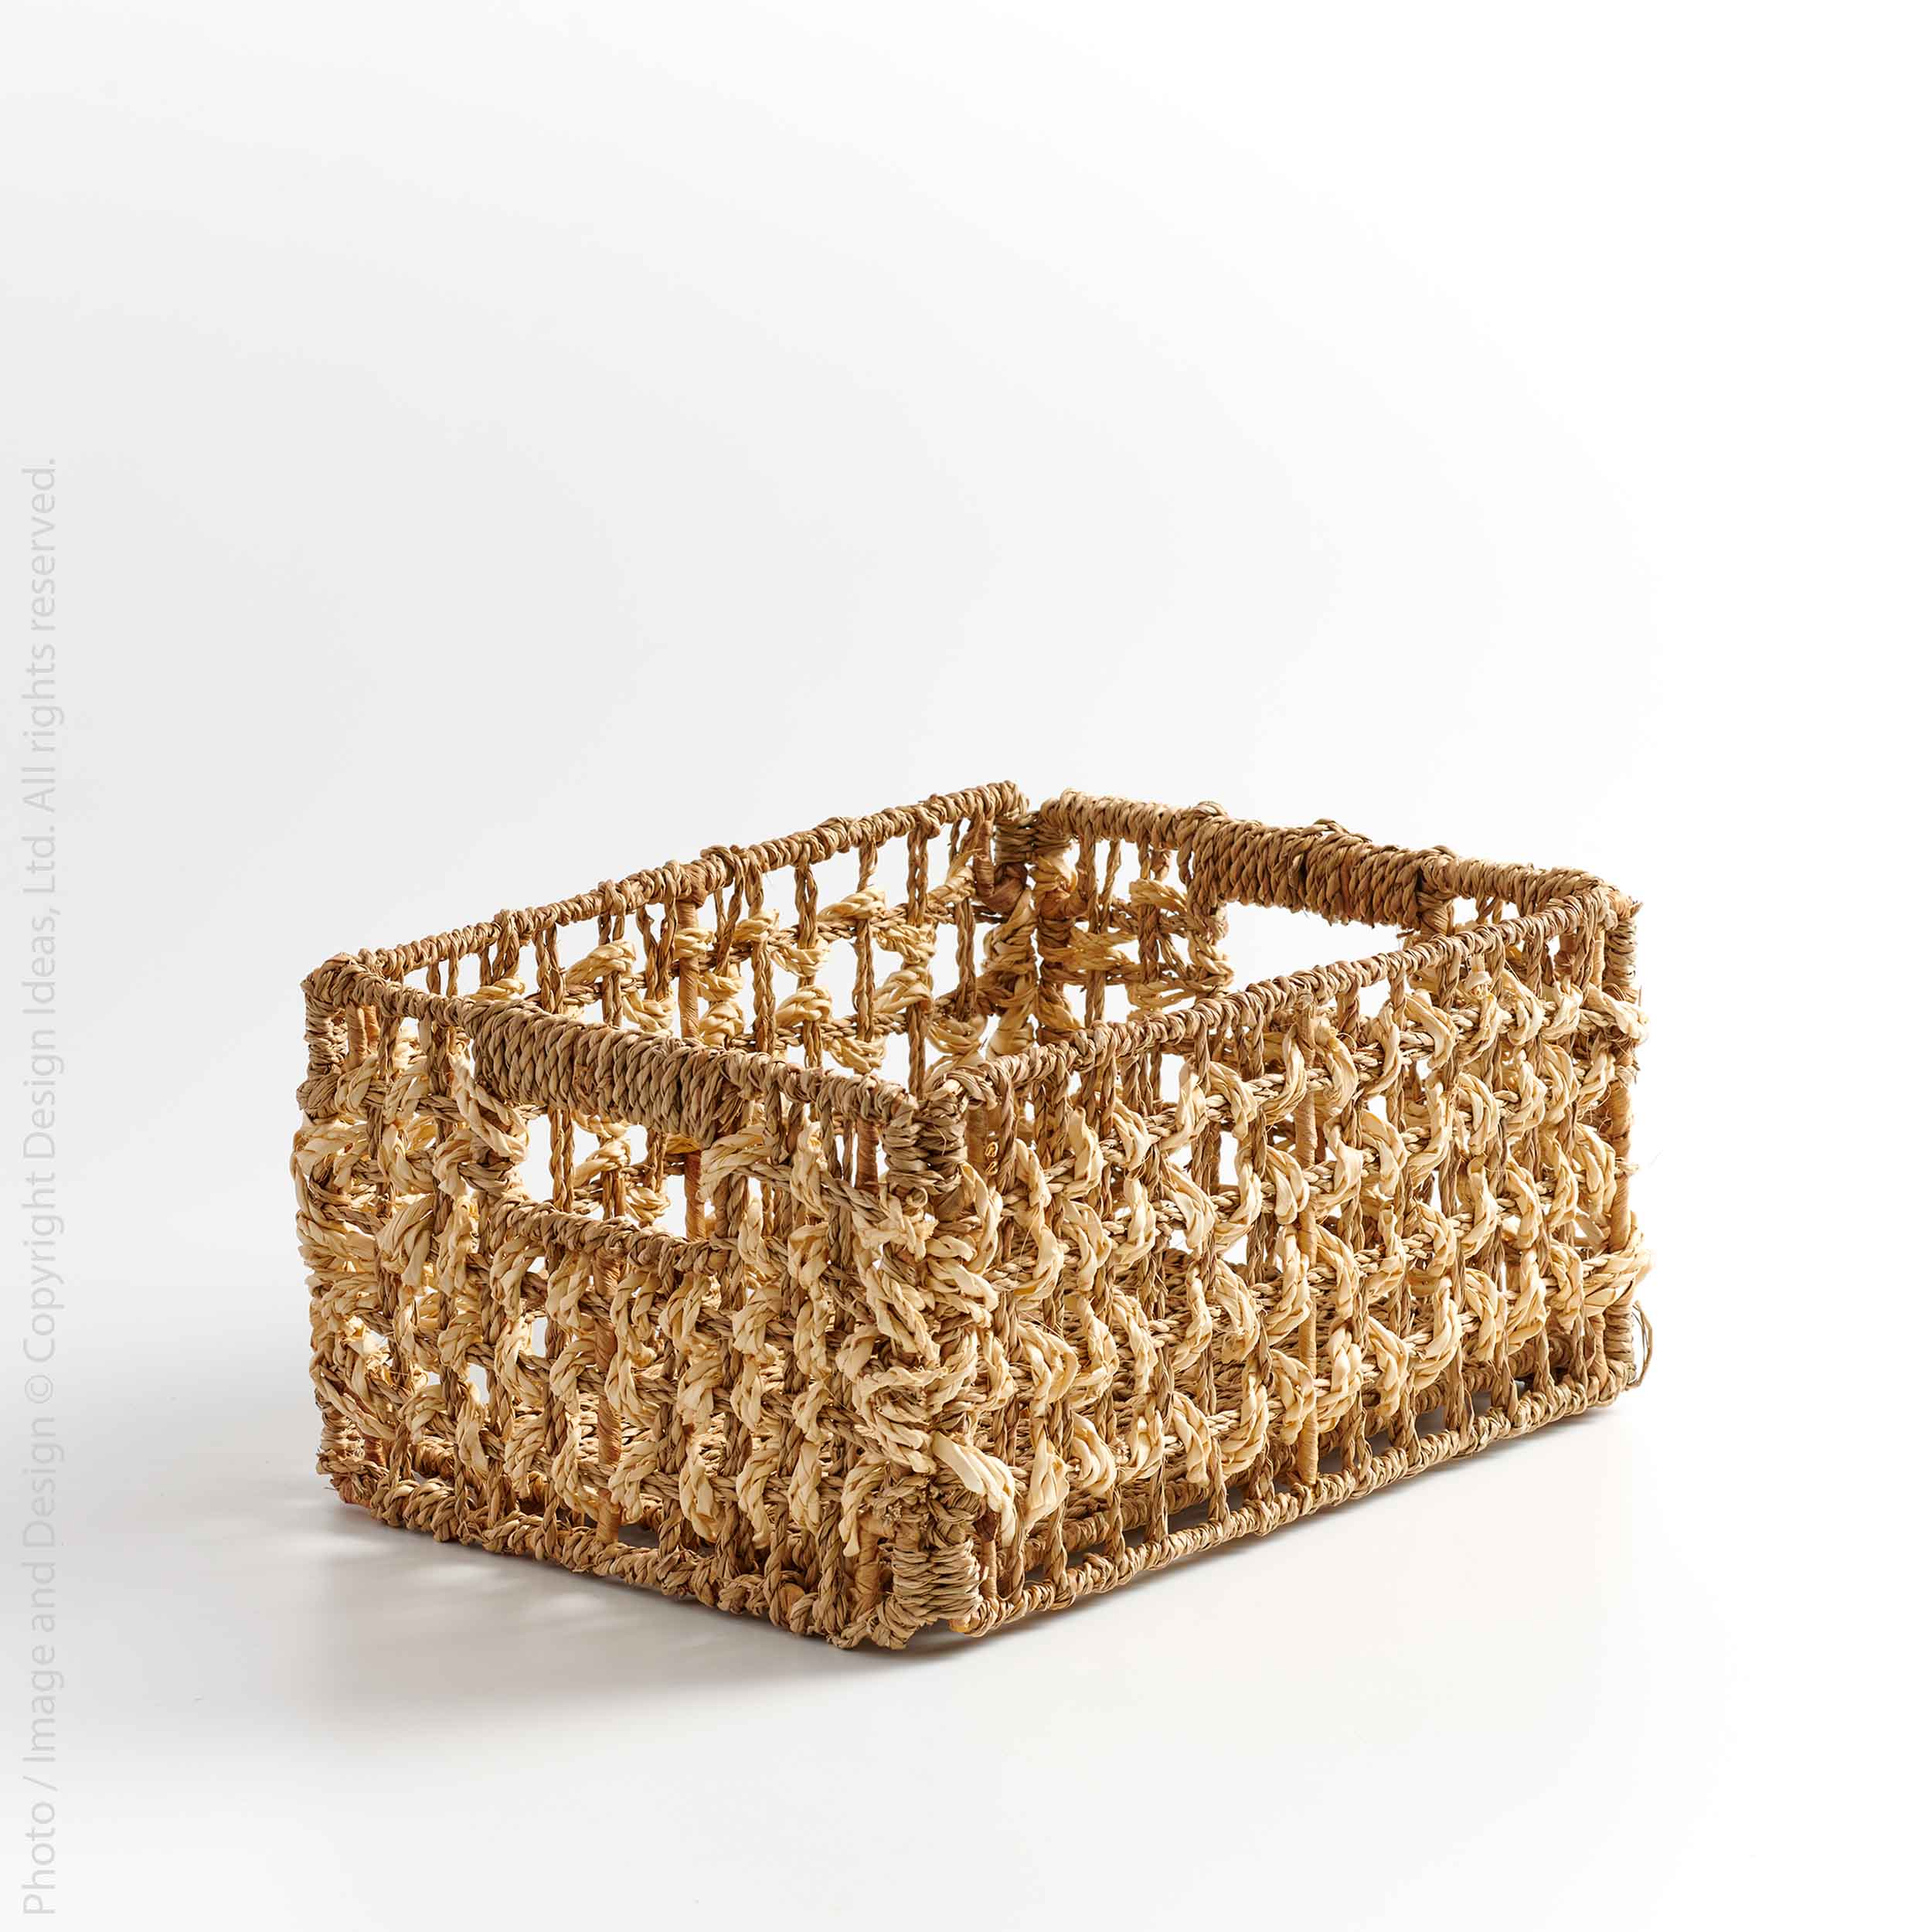 Mensch™ Medium Hand Woven Palm and Seagrass Basket (9.8 x 13.8 x 7.1 in)